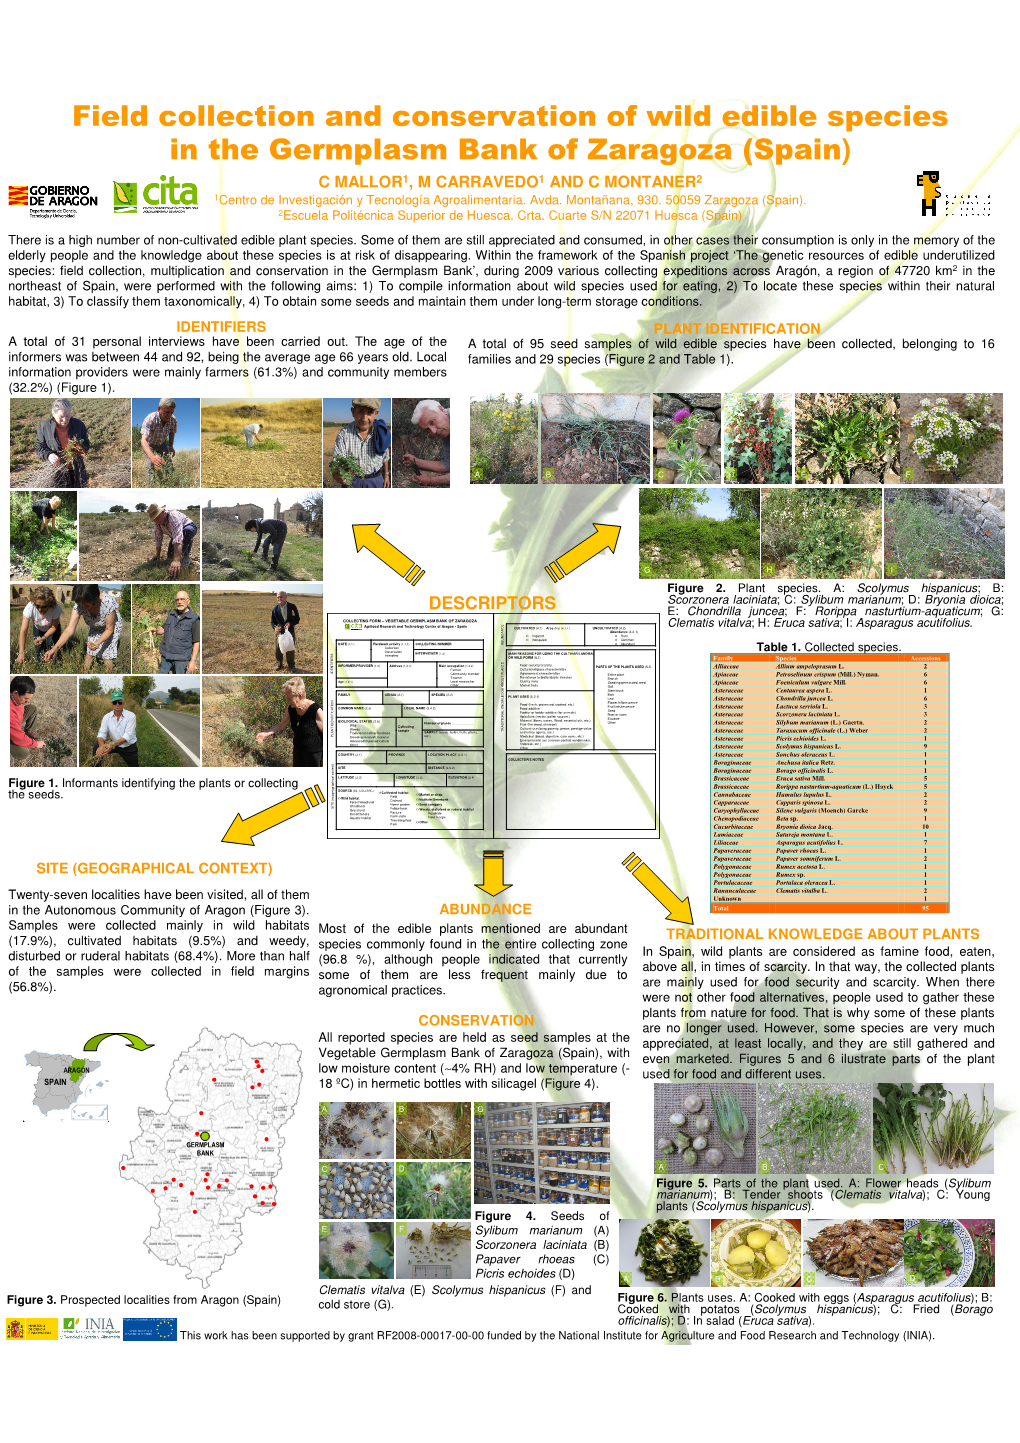 Field Collection and Conservation of Wild Edible Species in The